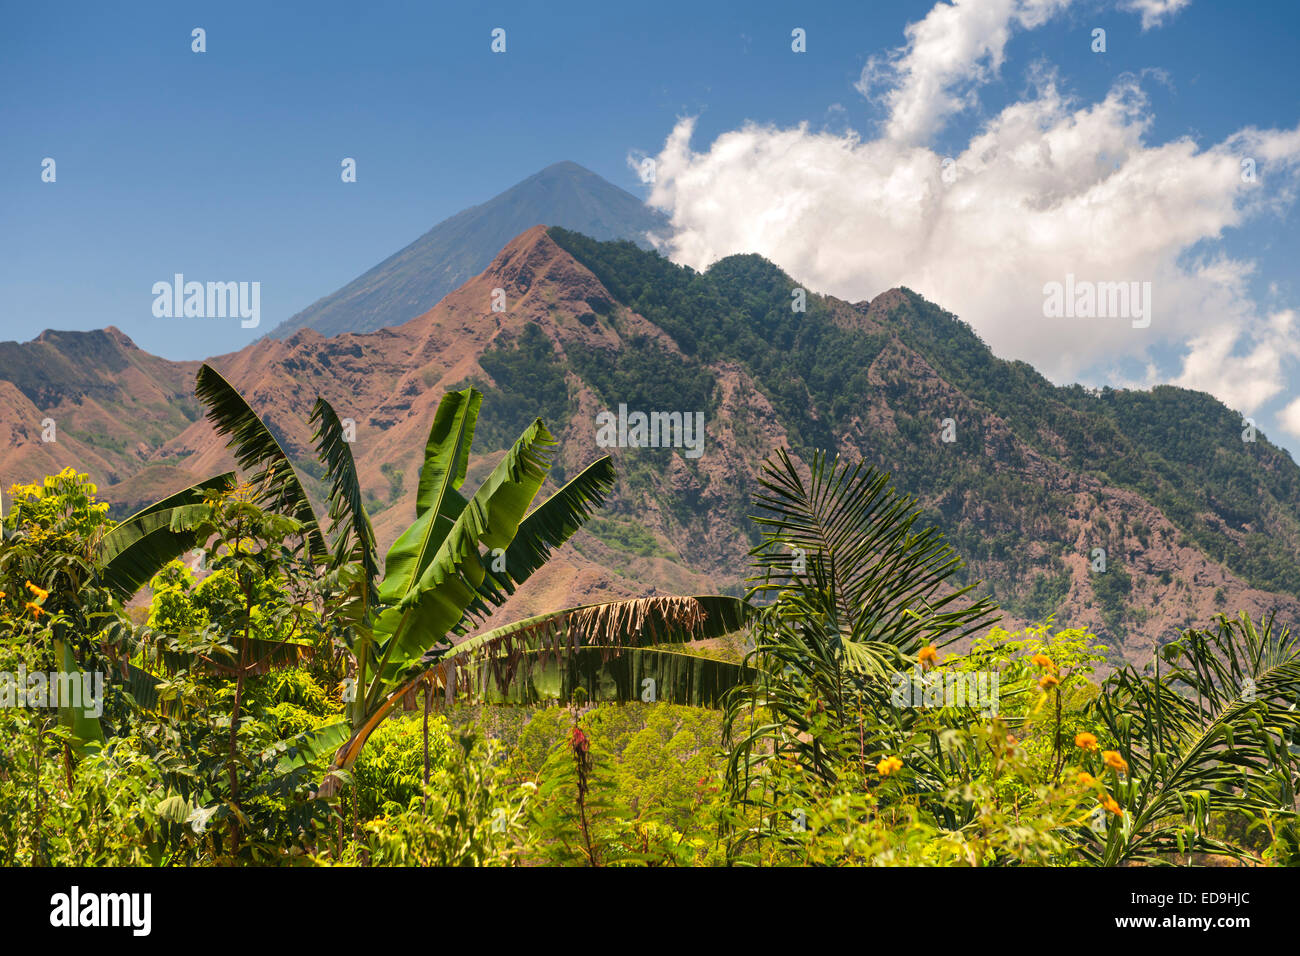 Mount Inerie, a volcano on Flores island, East Nusa Tenggara, Indonesia. Stock Photo